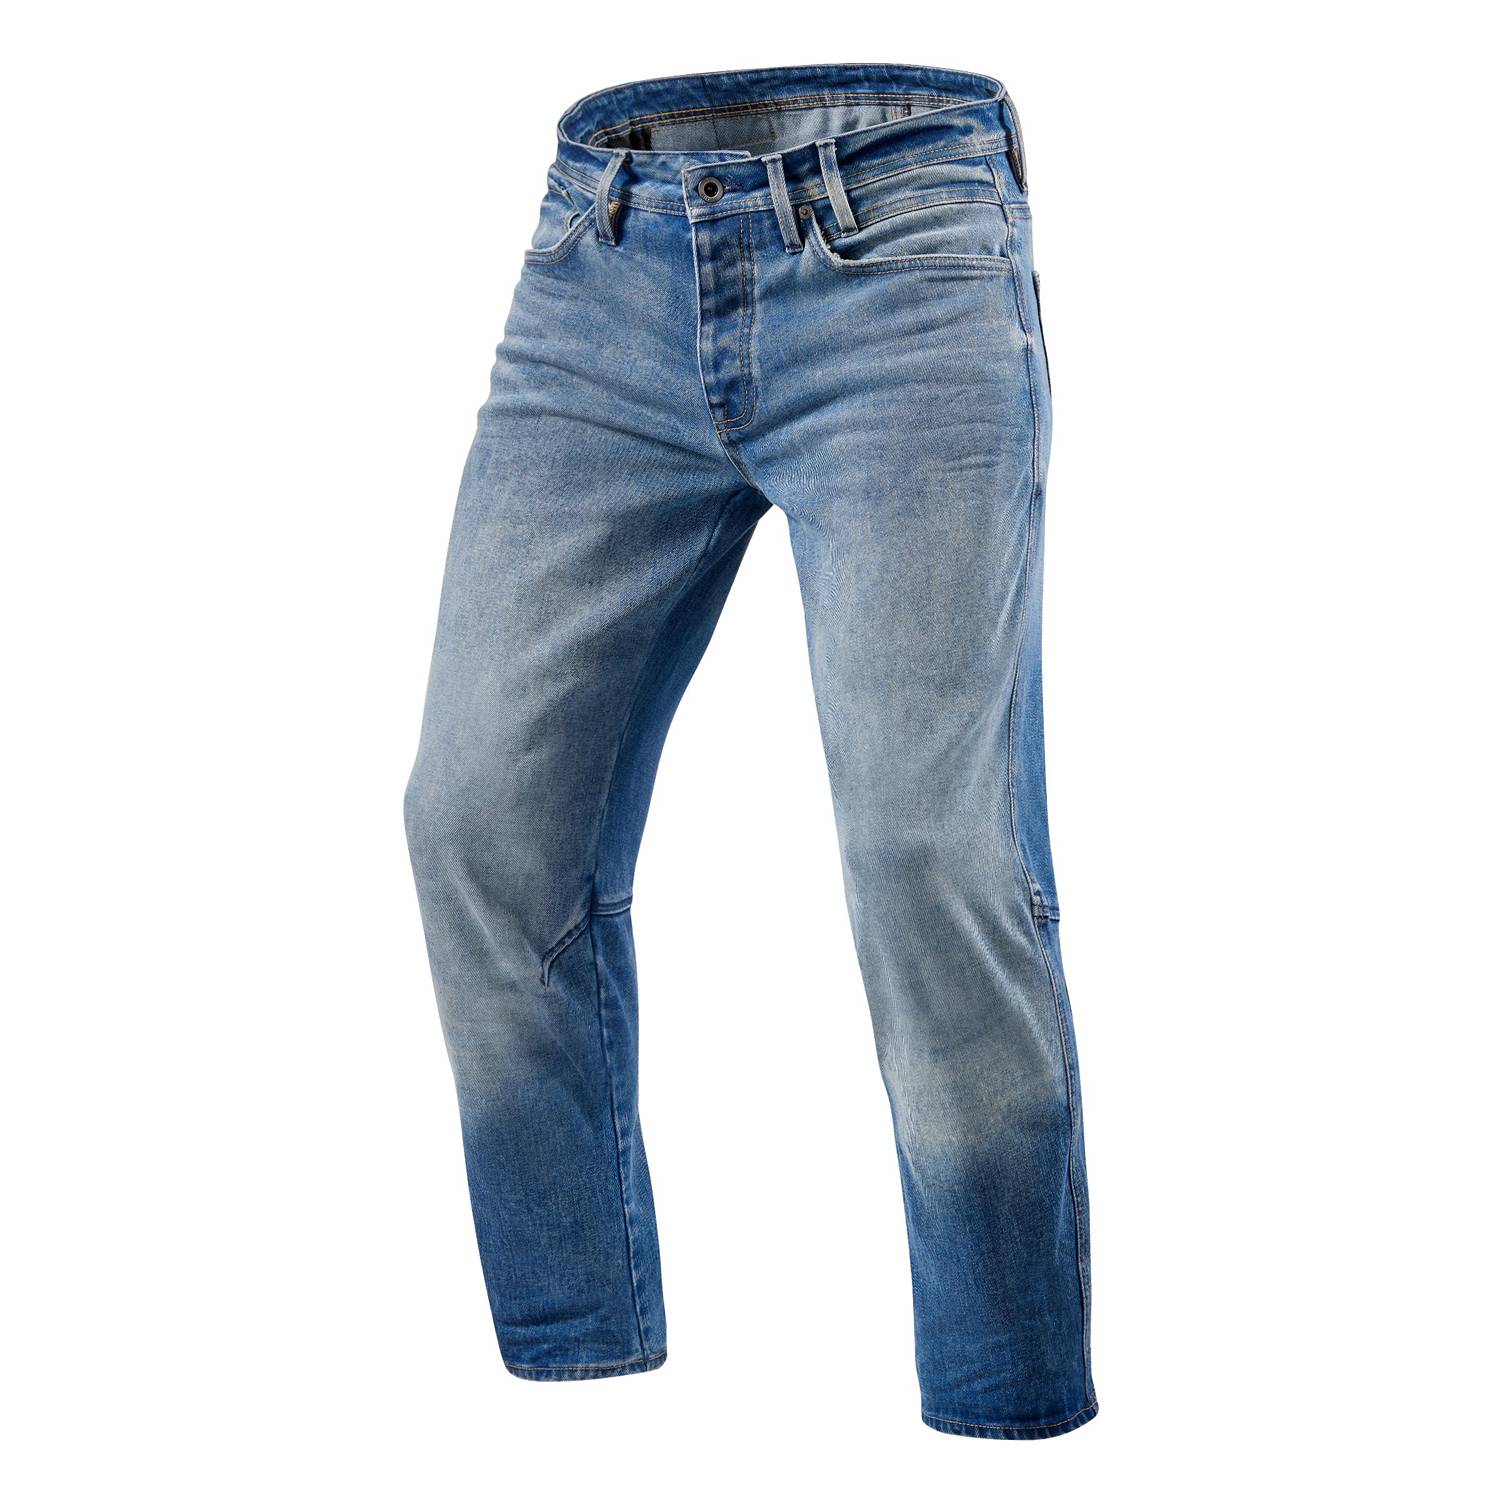 Image of EU REV'IT! Salt TF Mid Blue Used Motorcycle Jeans Taille L32/W31